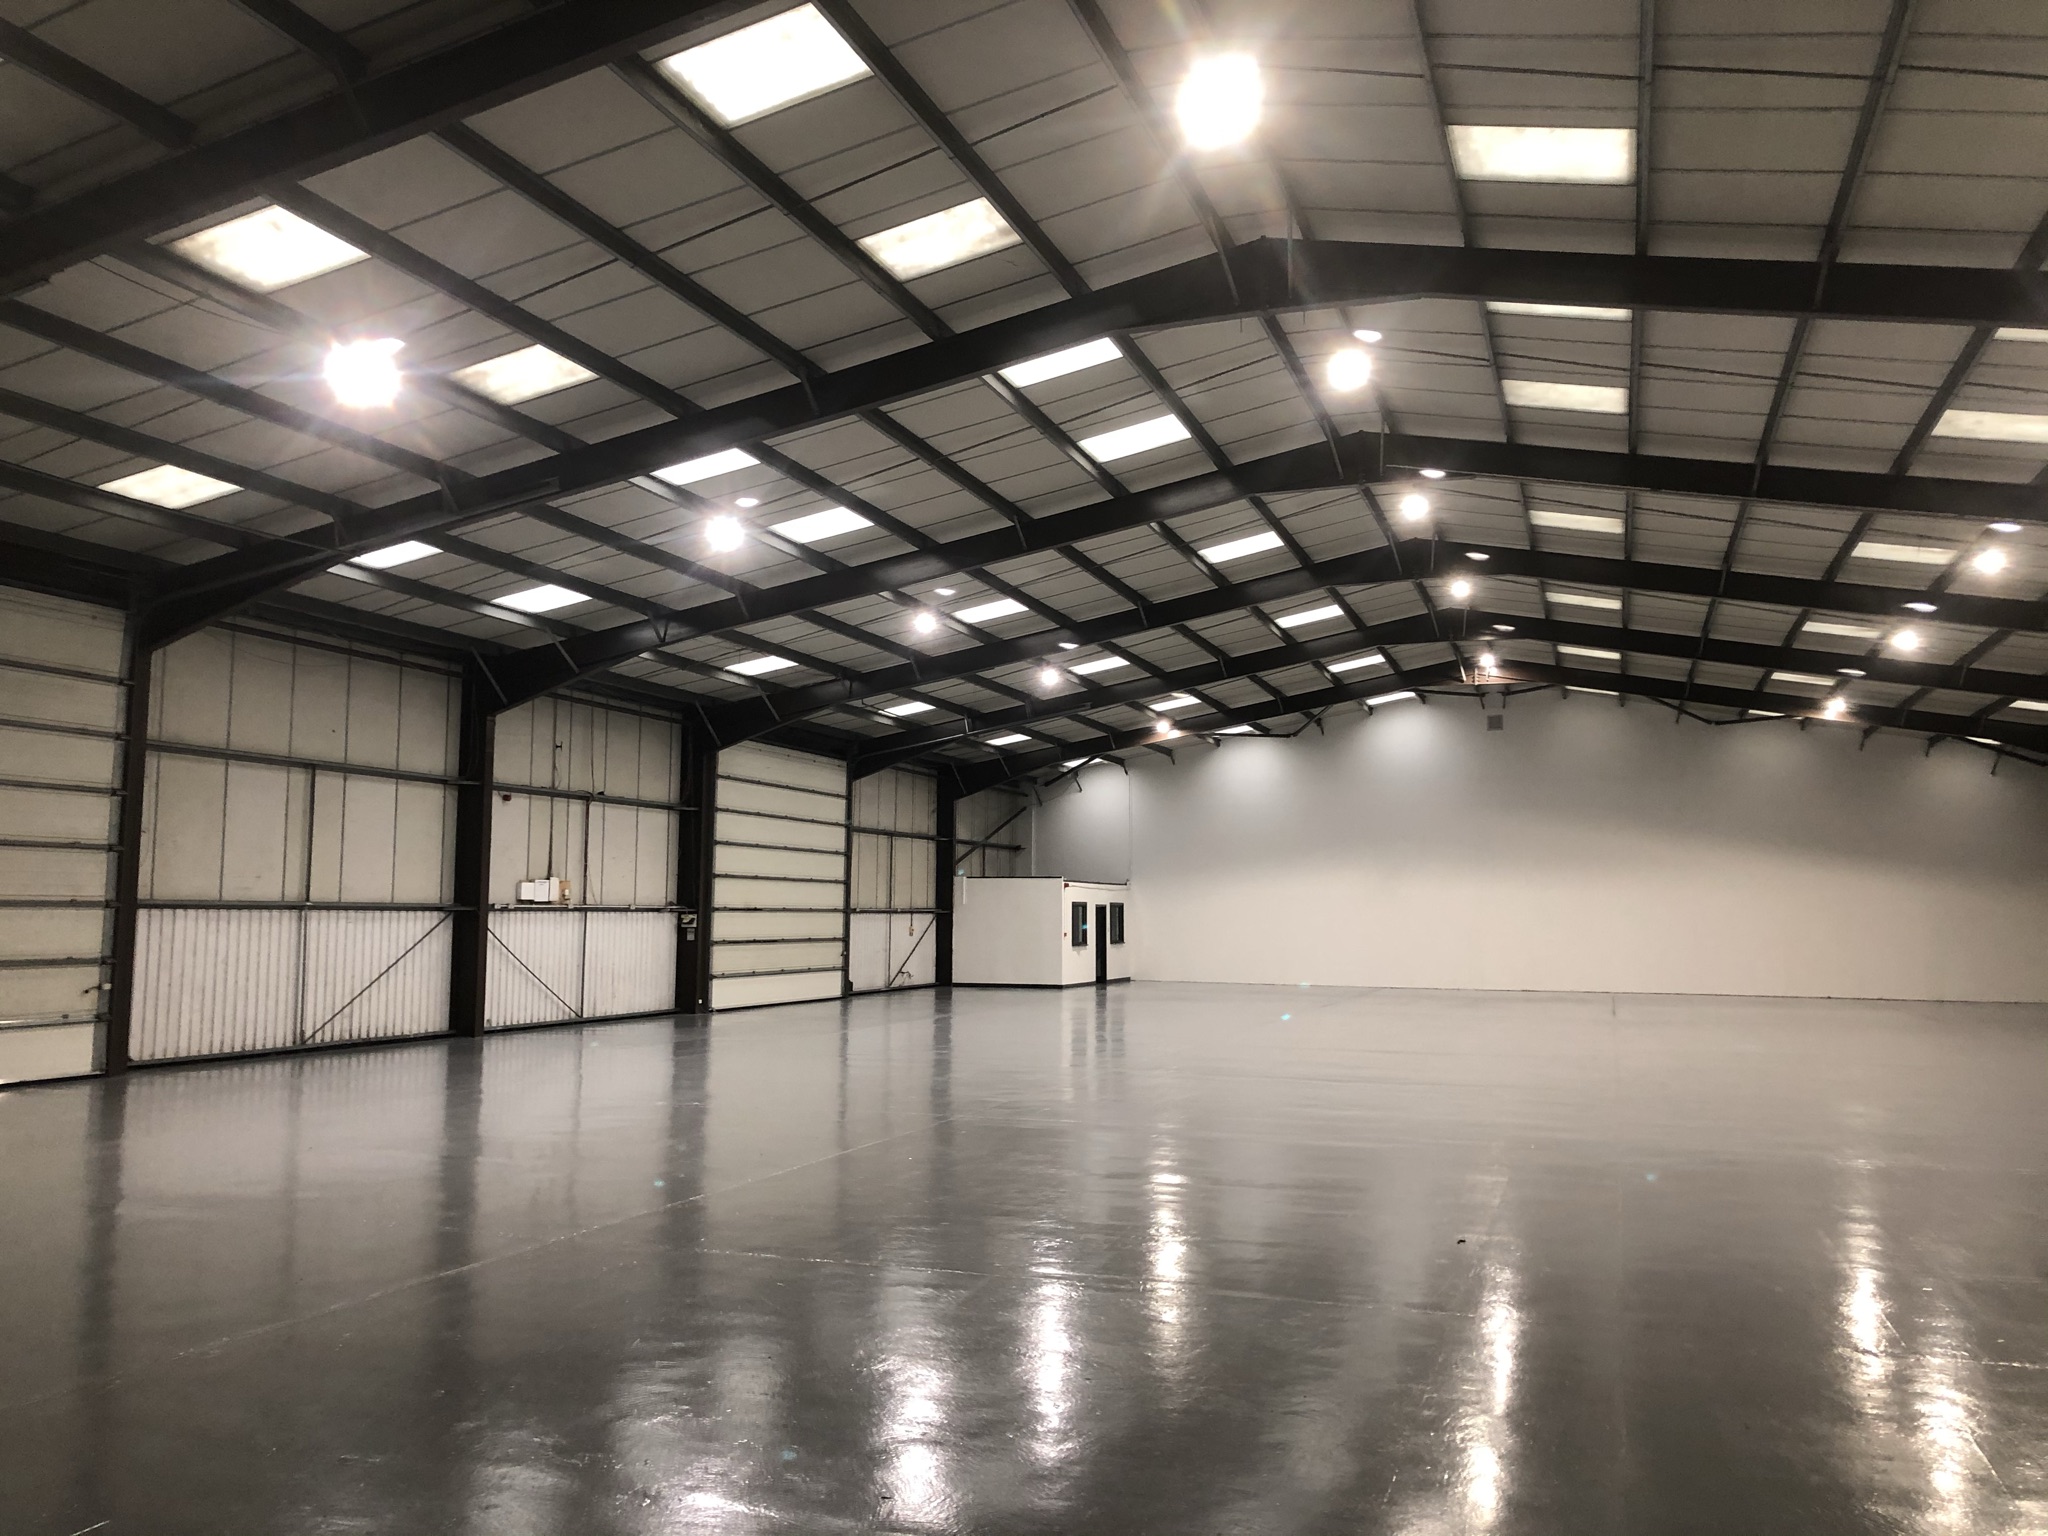 0 bed Warehouse for rent in Ramsgate. From Azure Property Consultants